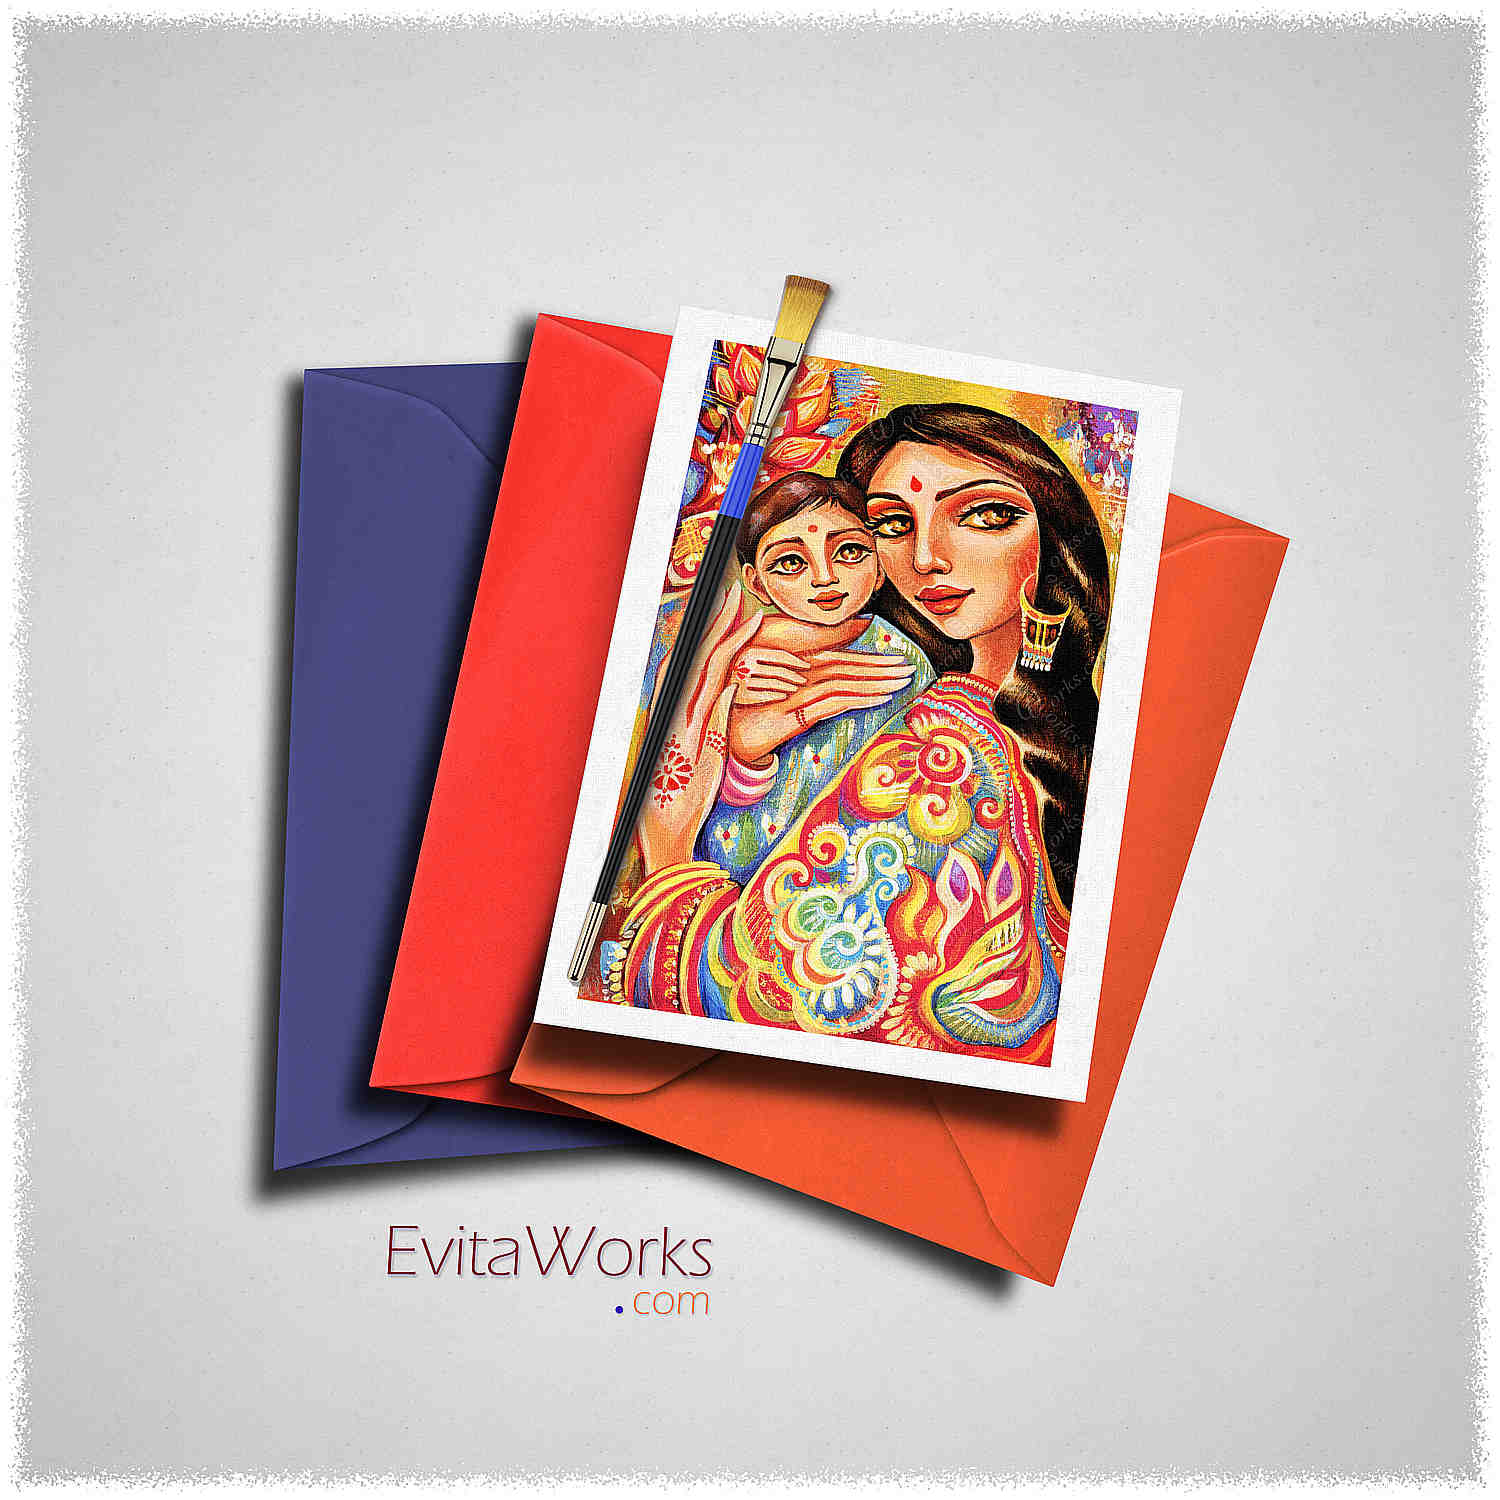 Hit to learn about "Goddess Blessing, Mother and Child" on cards